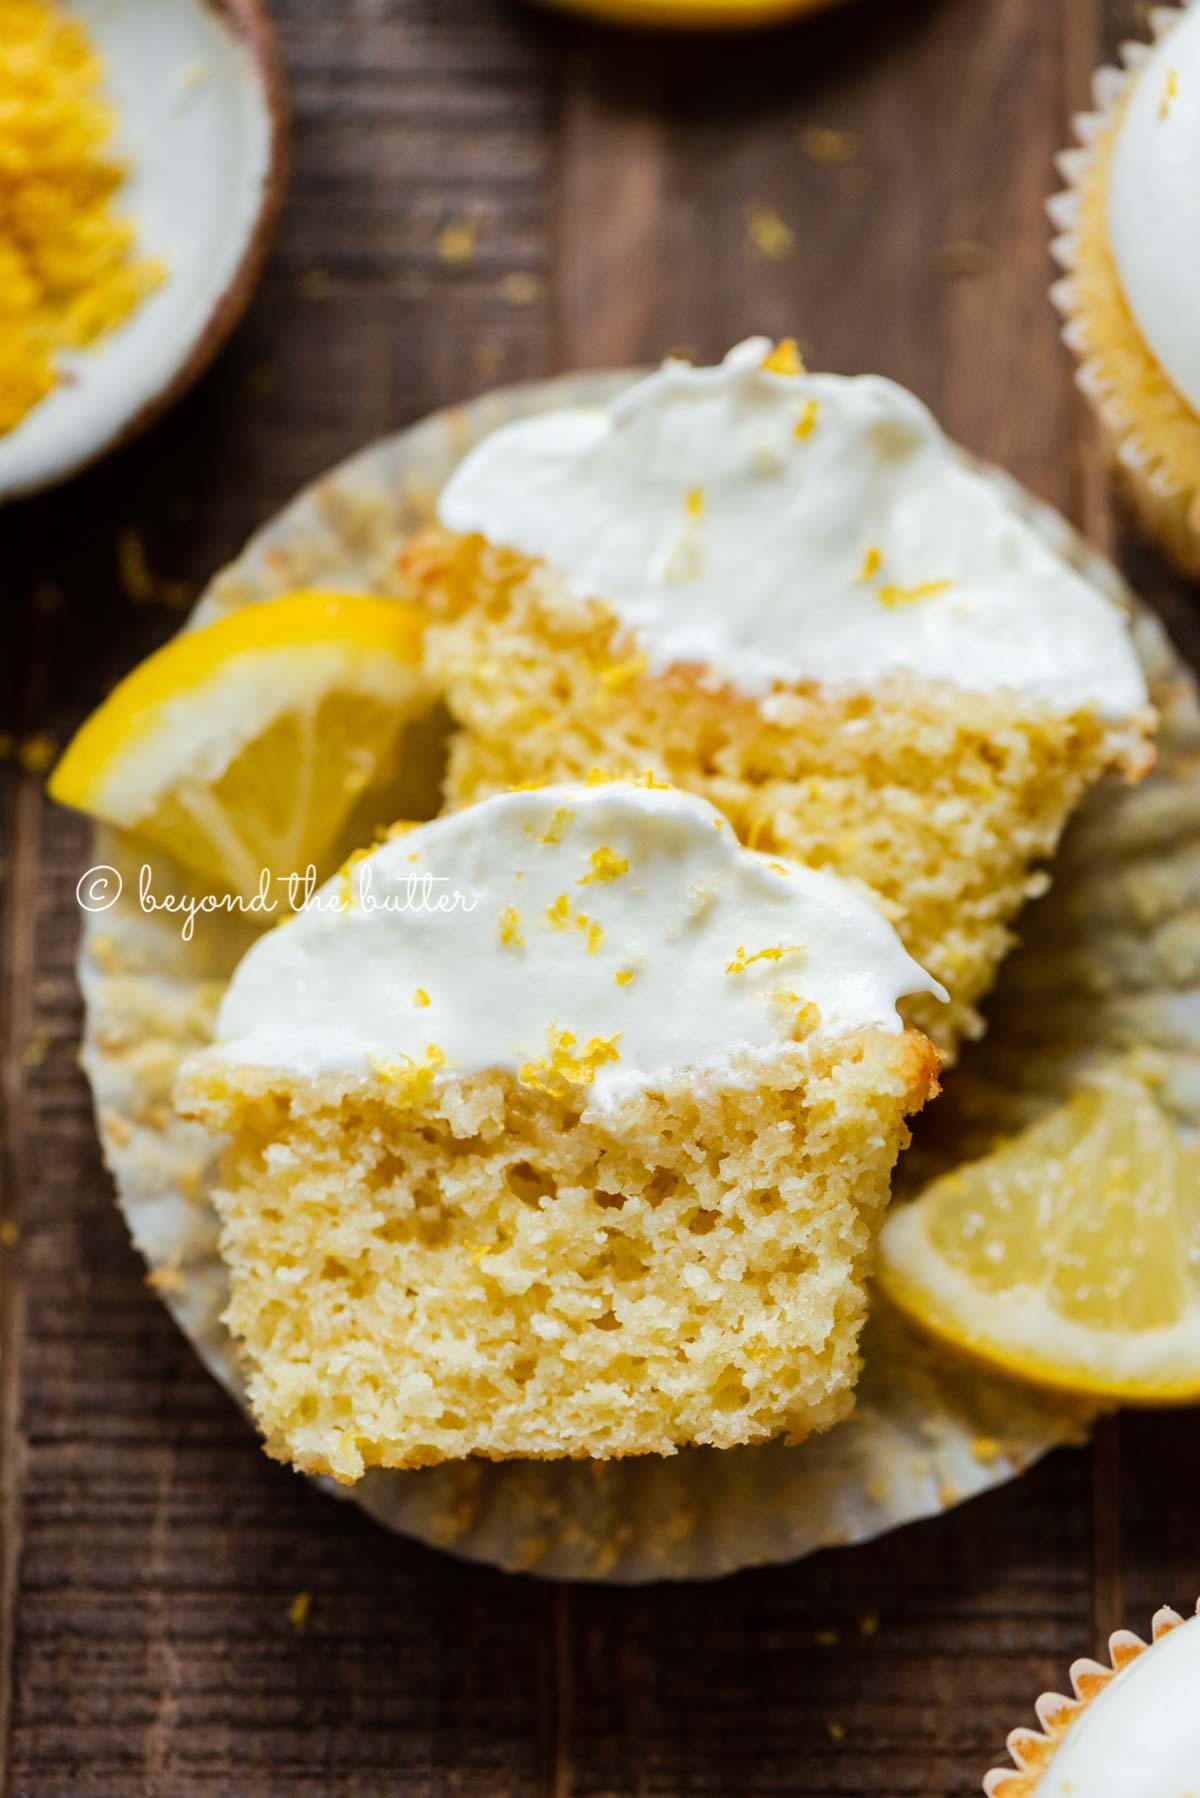 Sliced open lemon cupcake with whipped lemon cream cheese frosting on cupake liner and 2 wedges of lemons on a dark wood background.